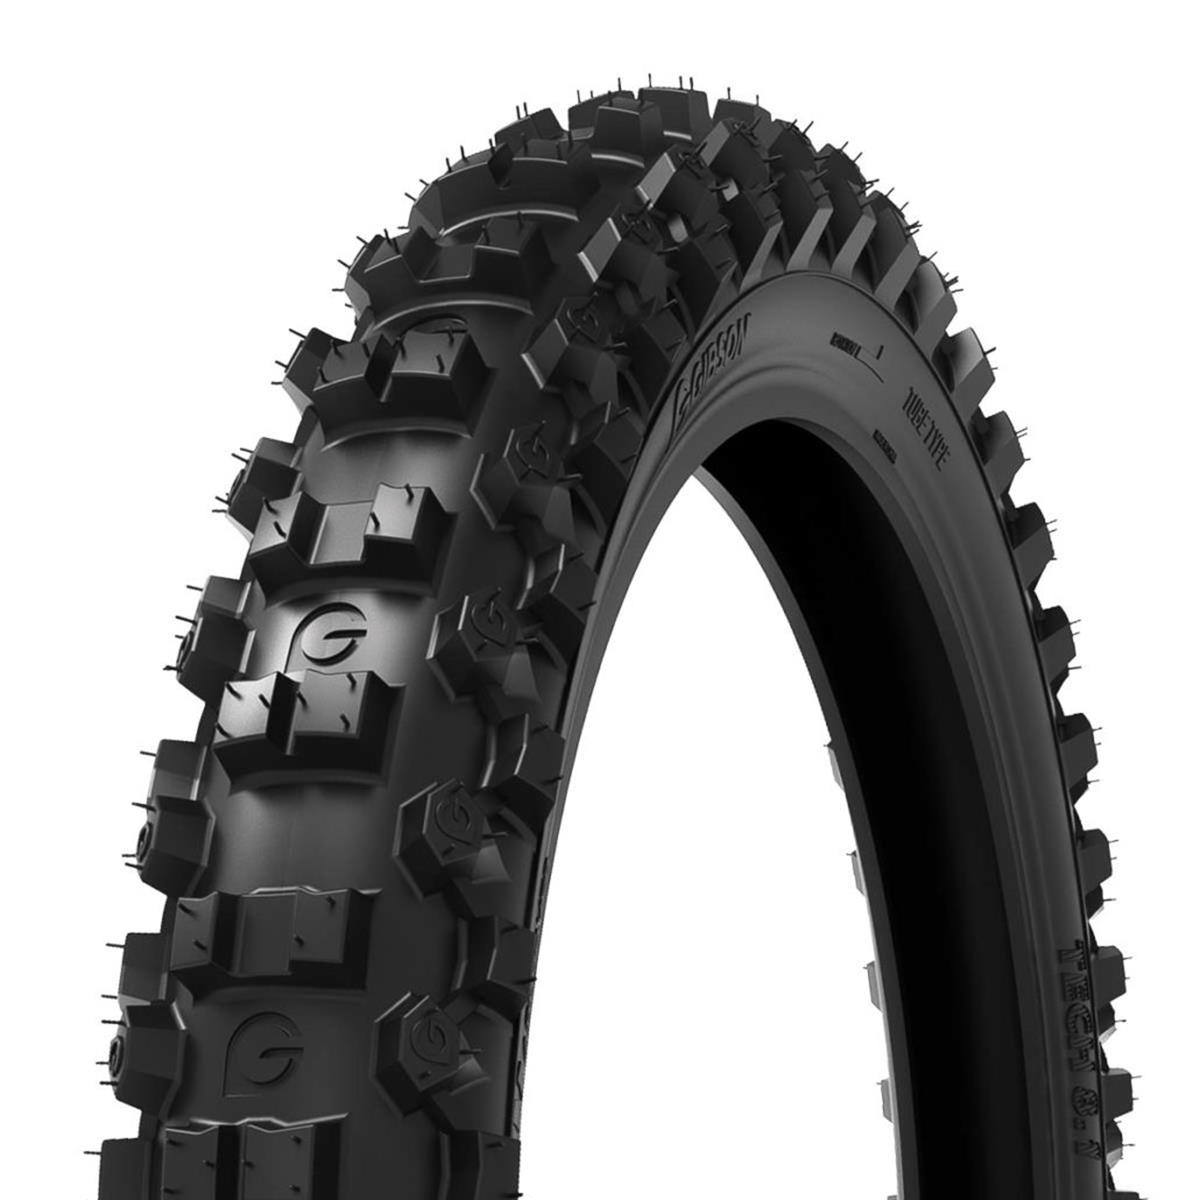 Gibson Front Tire Tech 9.1 90/100-21, FIM licensed, Soft